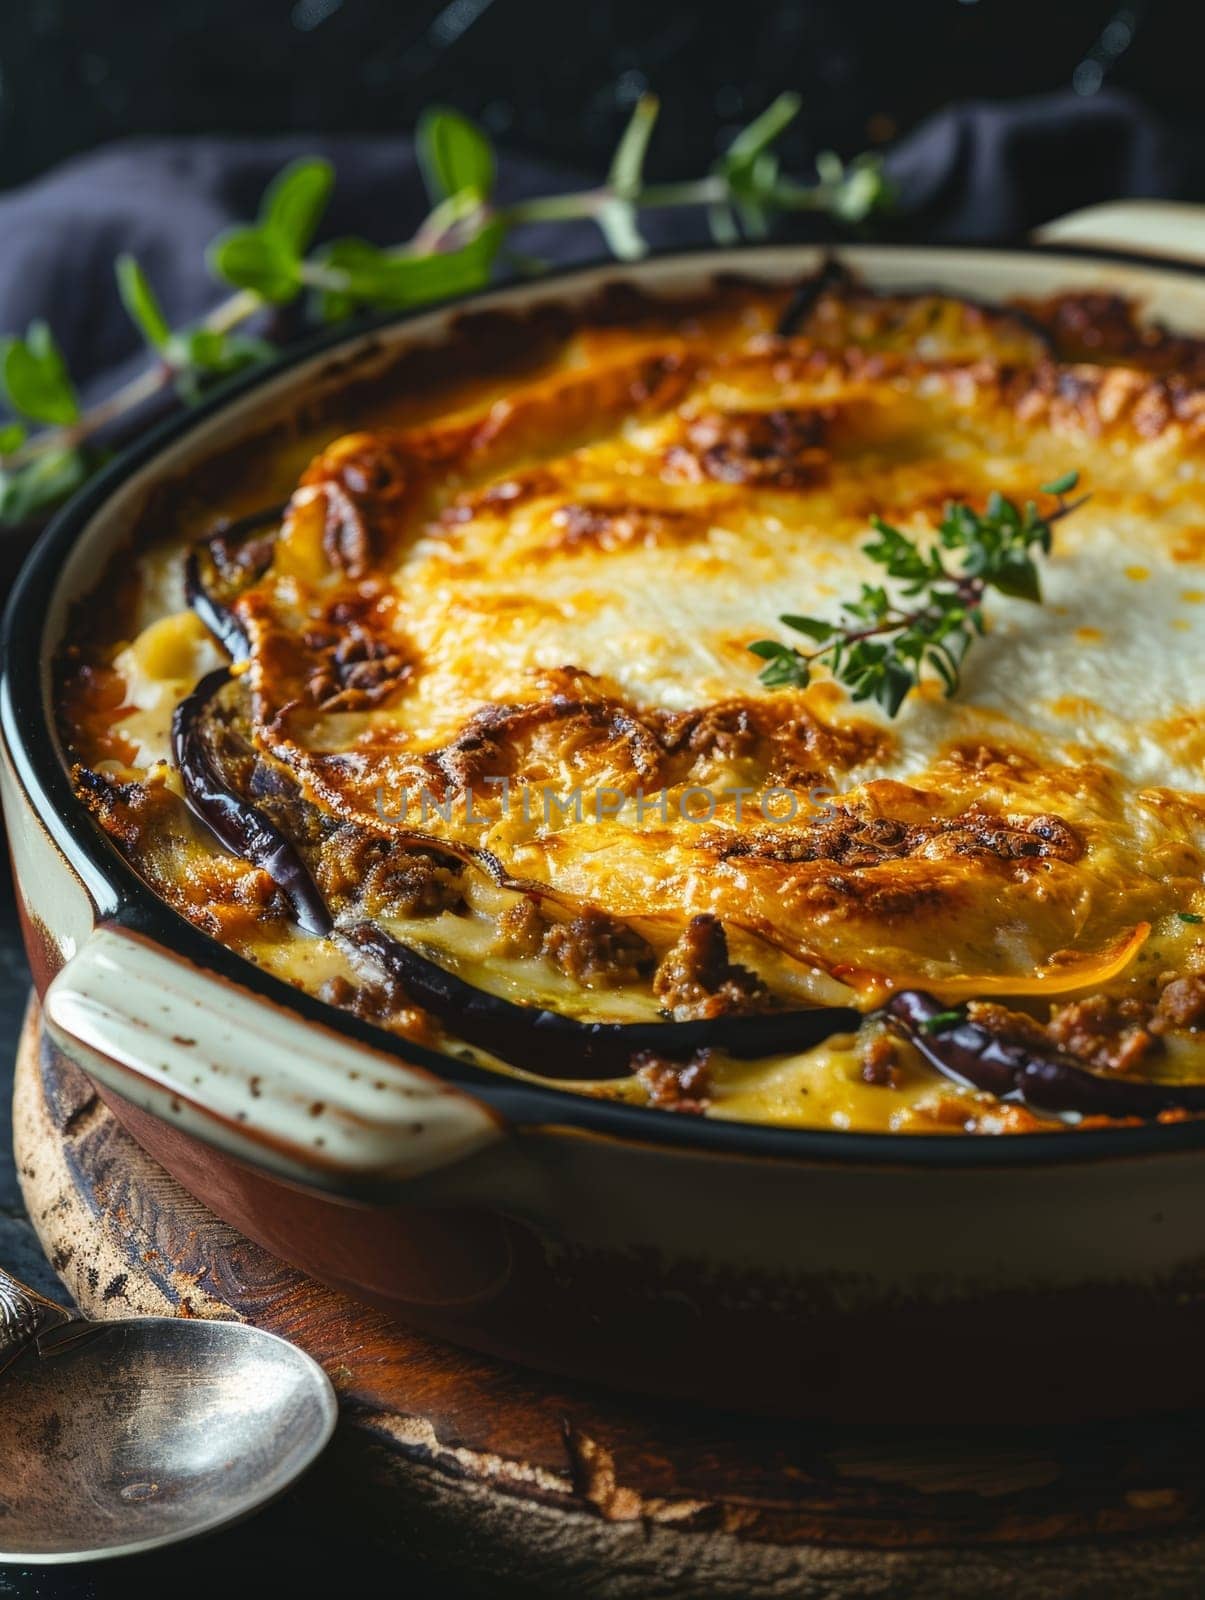 Delectable Greek moussaka baked in a ceramic dish, showcasing the classic layers of eggplant, minced meat, and rich bechamel sauce. Mediterranean dish is a comforting, homemade culinary delight. by sfinks